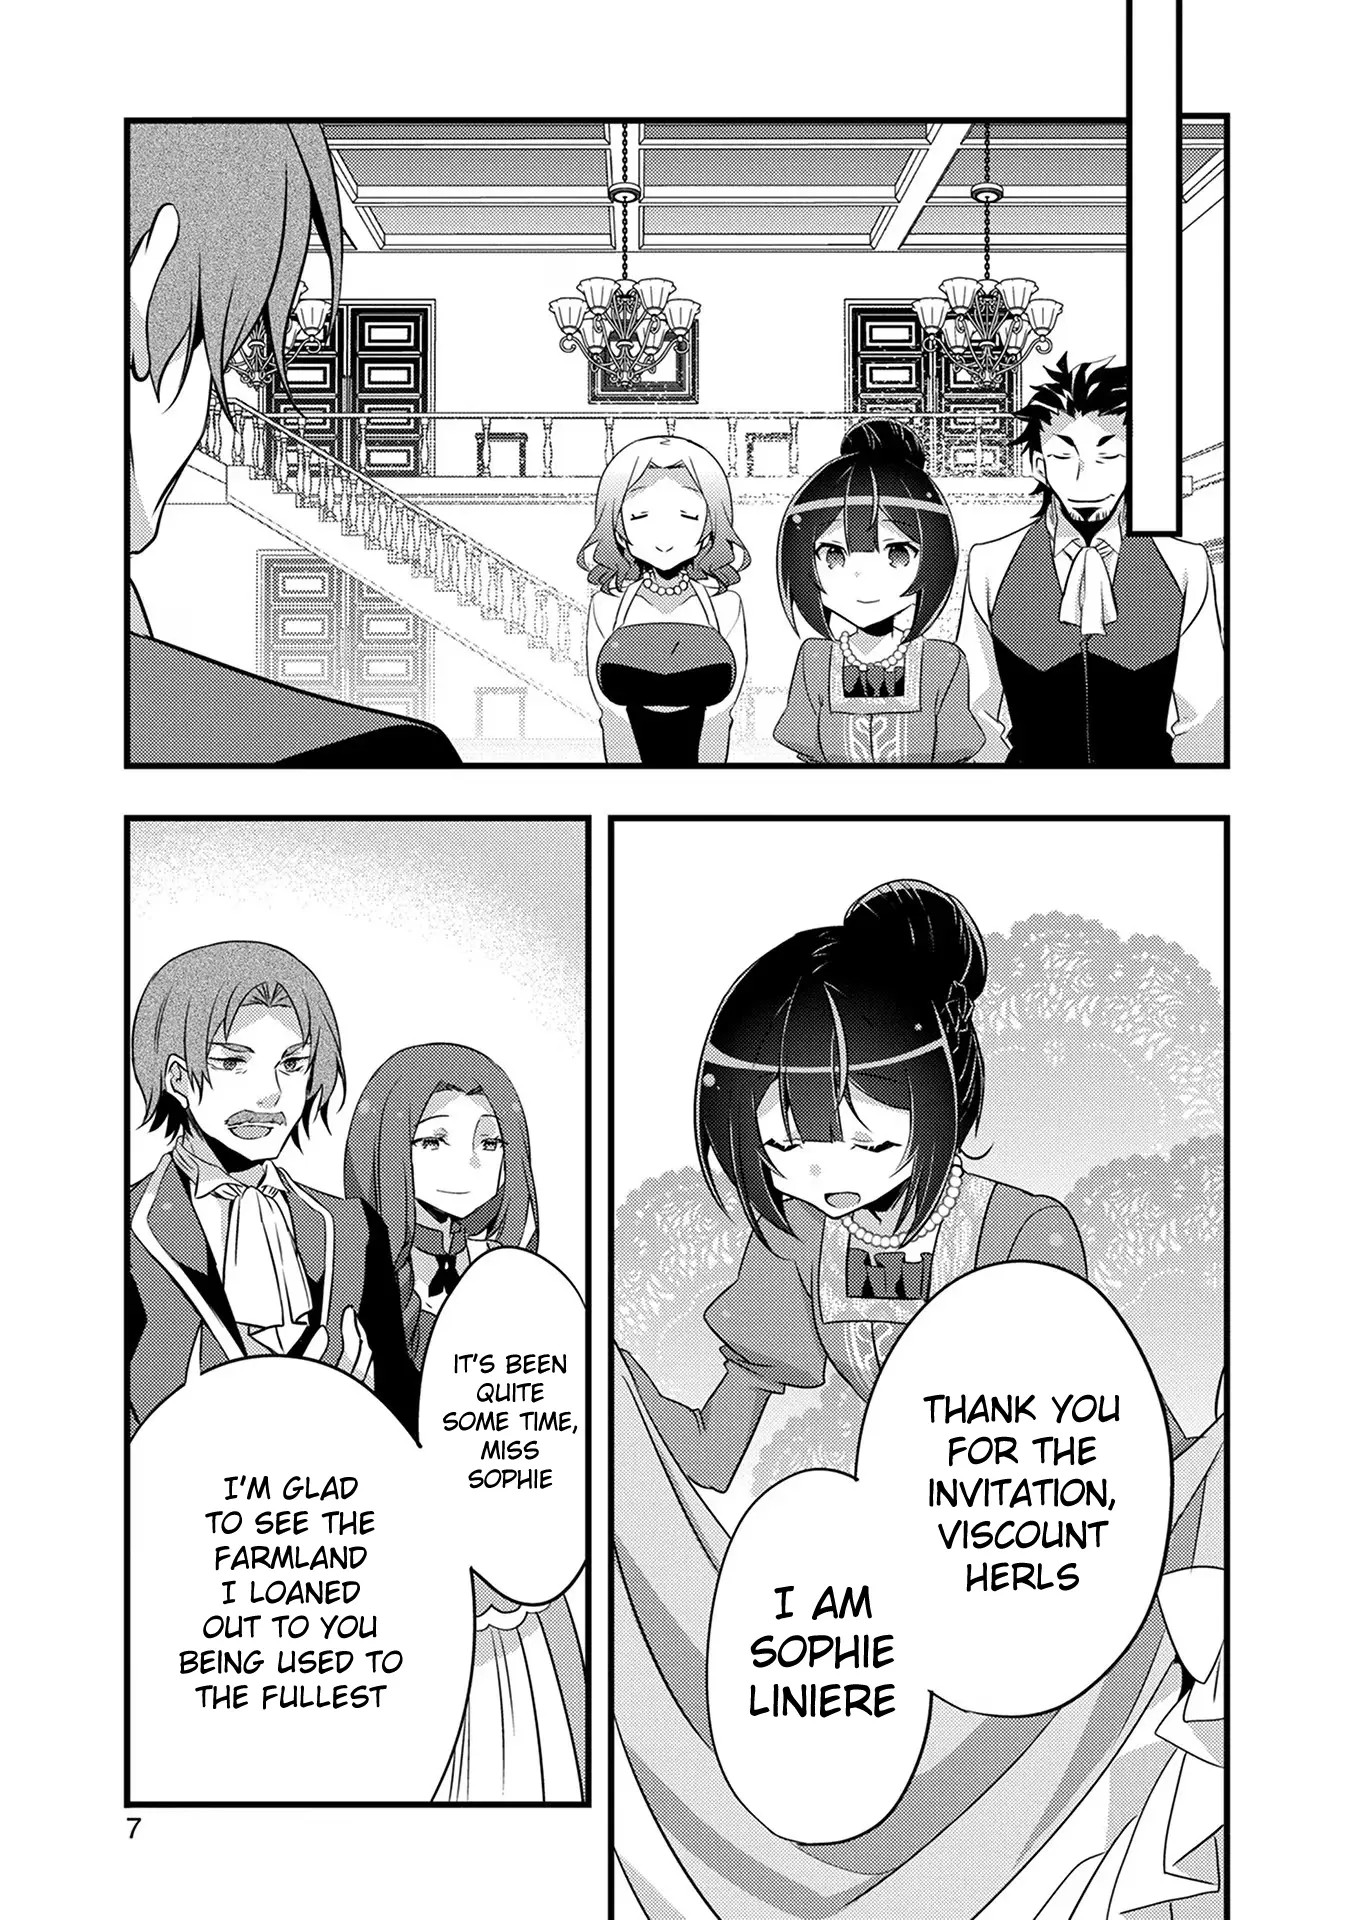 I Was a Man Before Reincarnating, So I Refuse a Reverse Harem - chapter 6 - #6